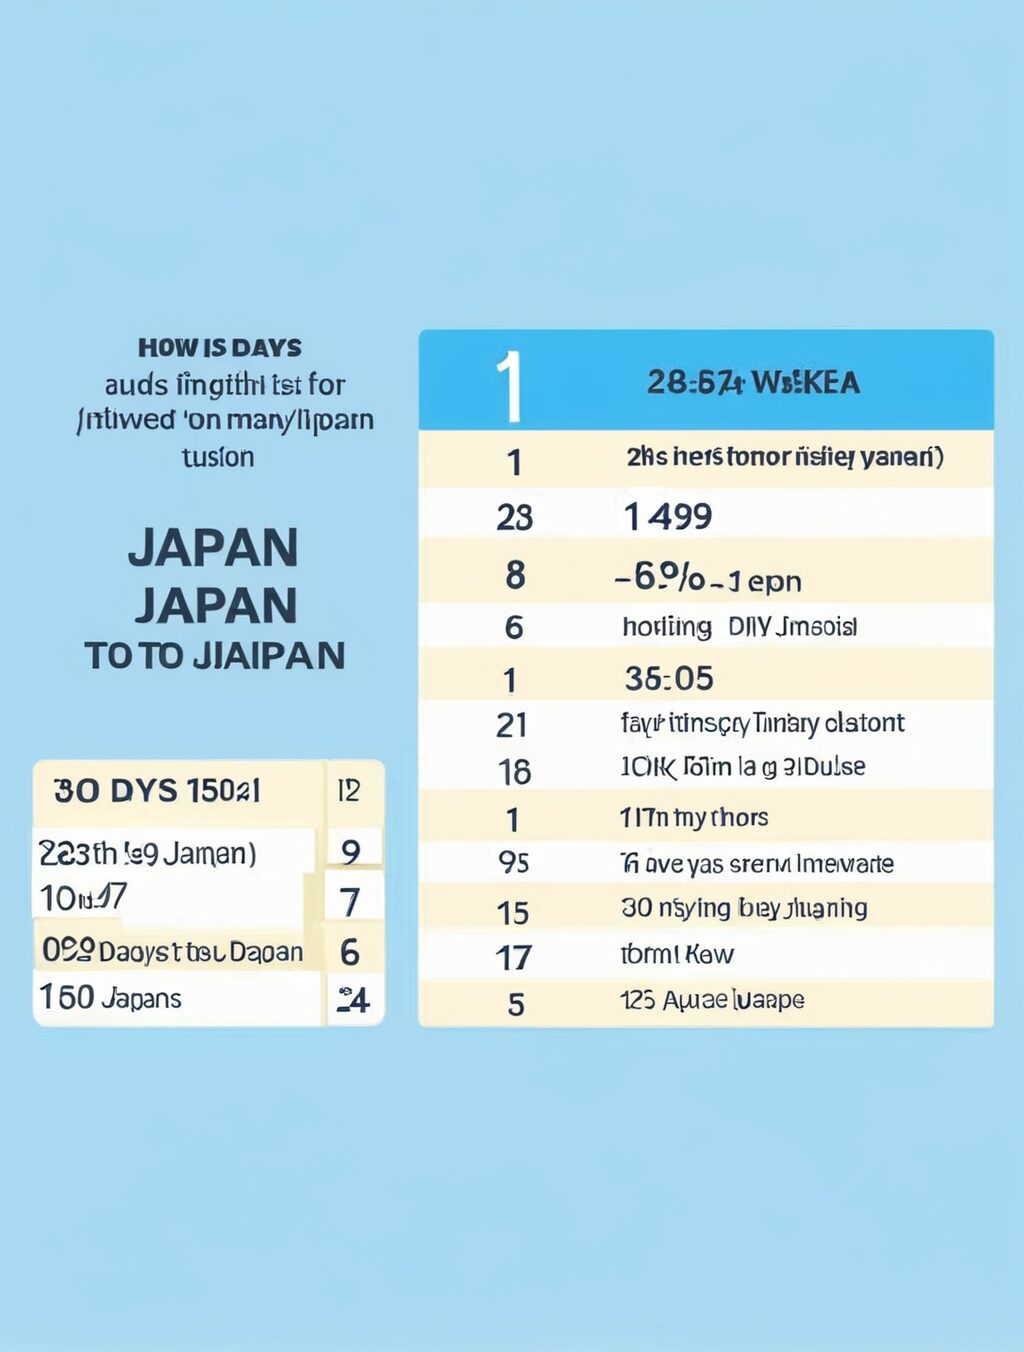 how many days to visit japan